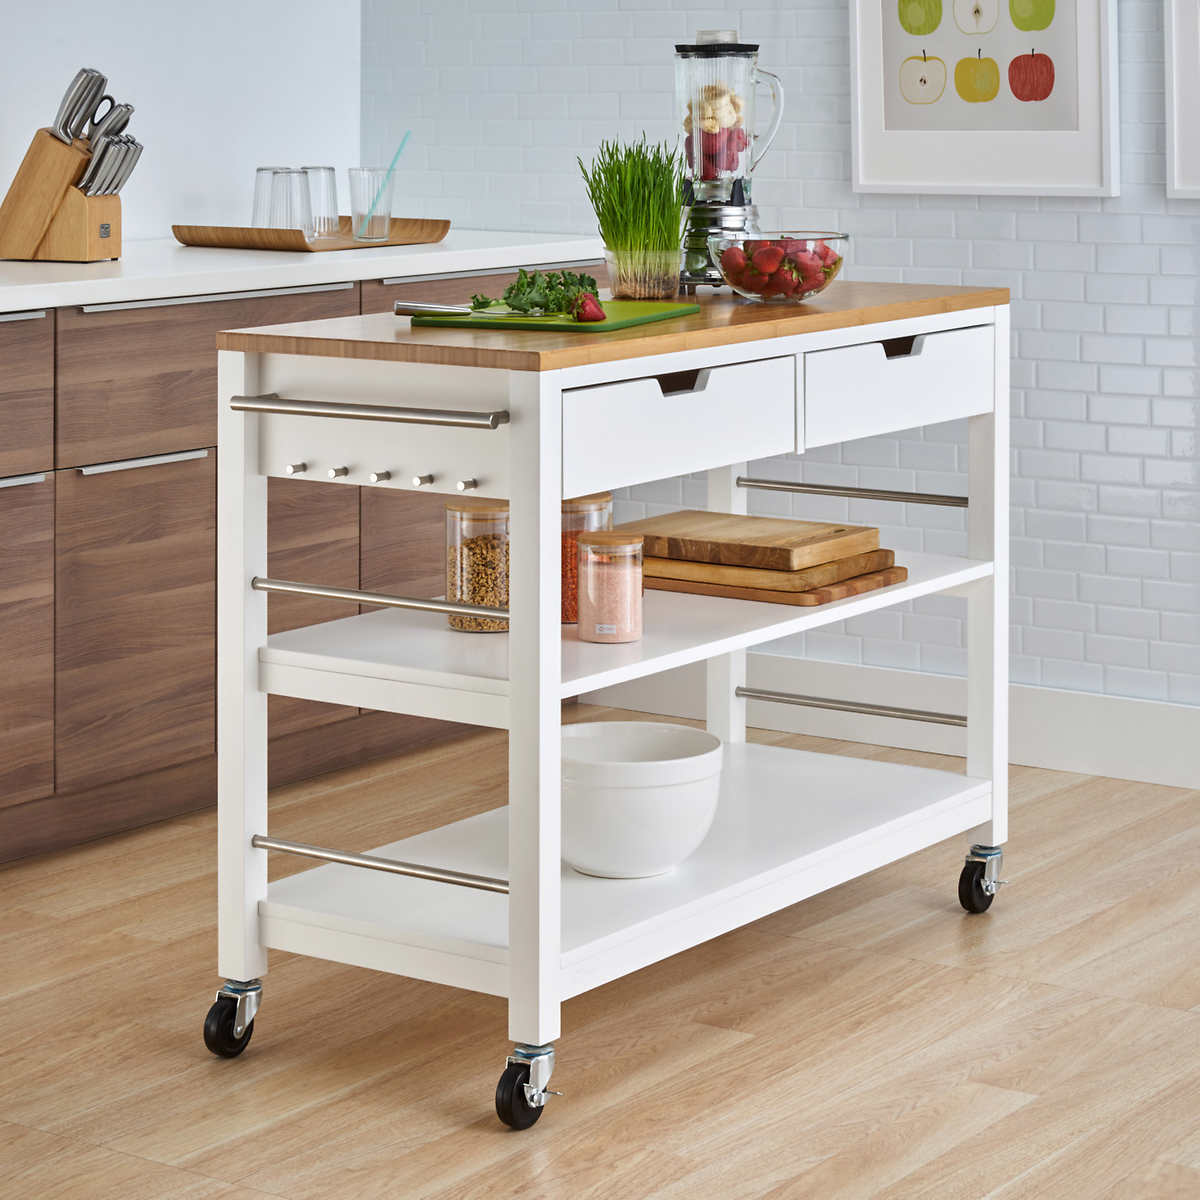 white kitchen cart with stainless steel top